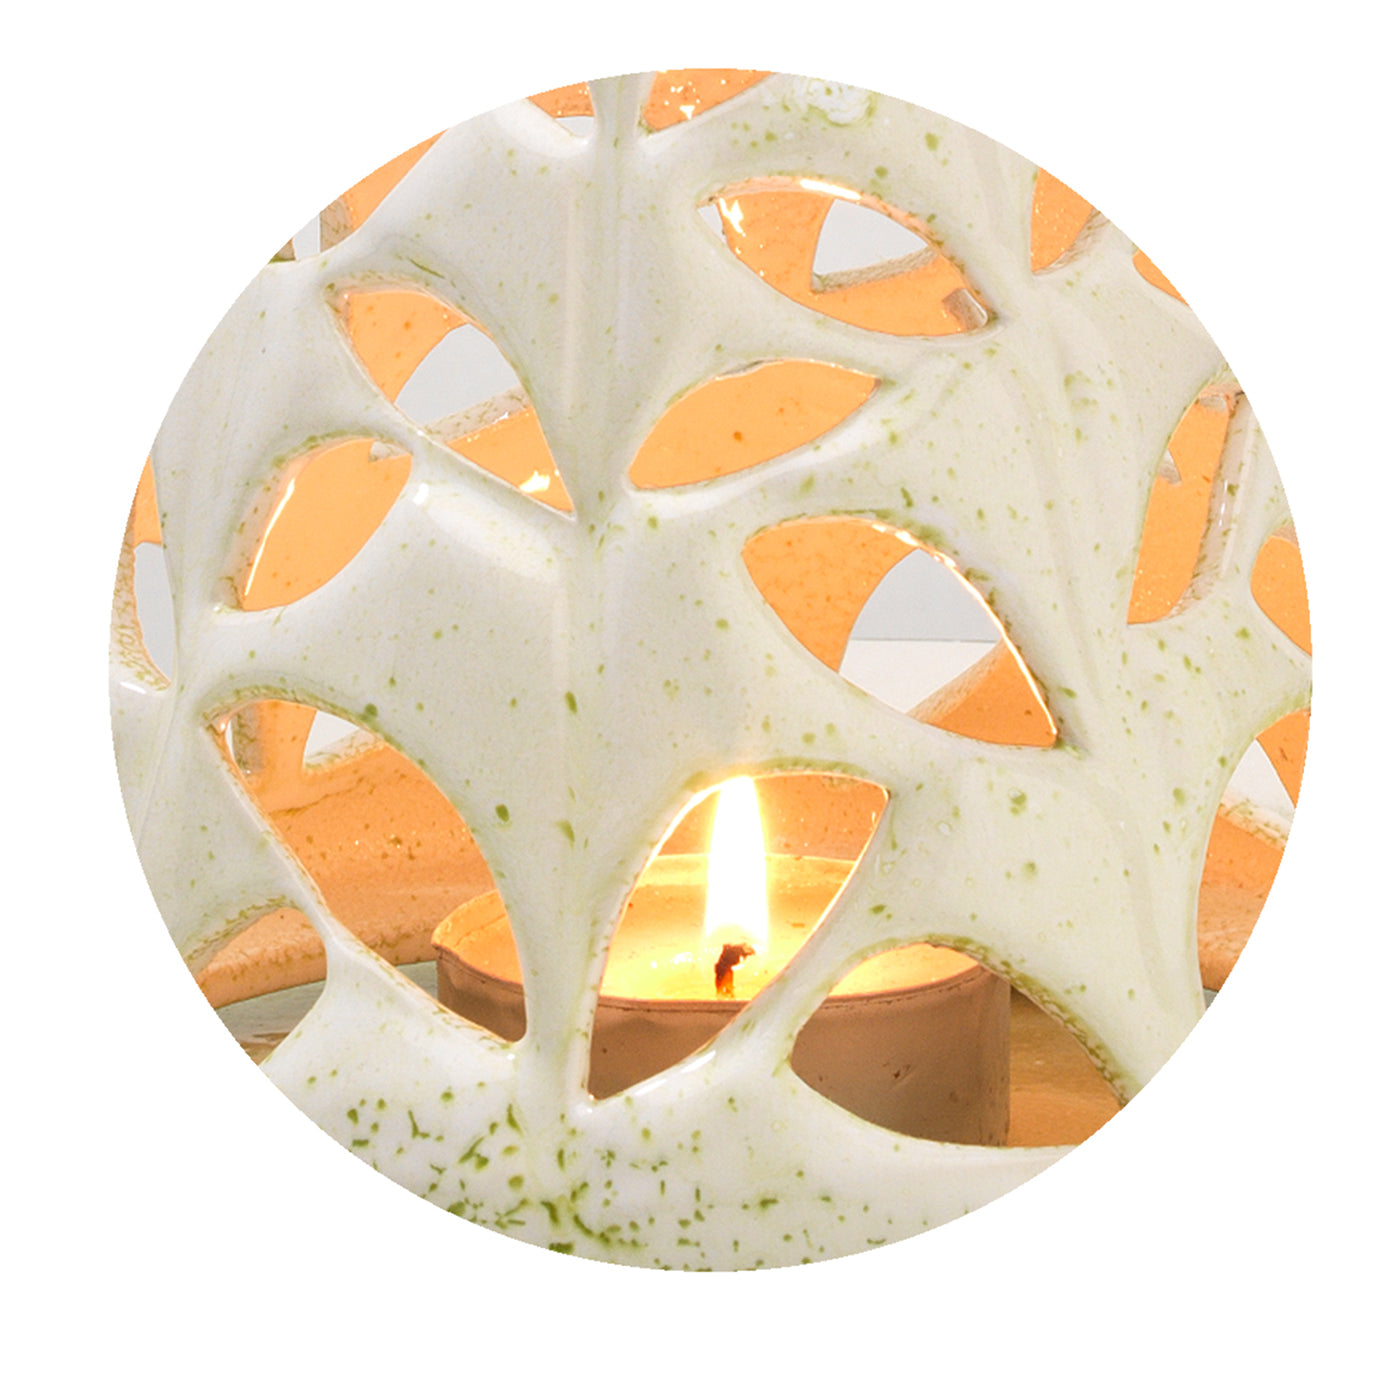 Never_The_Same cream Candle Holder - Alternative view 1